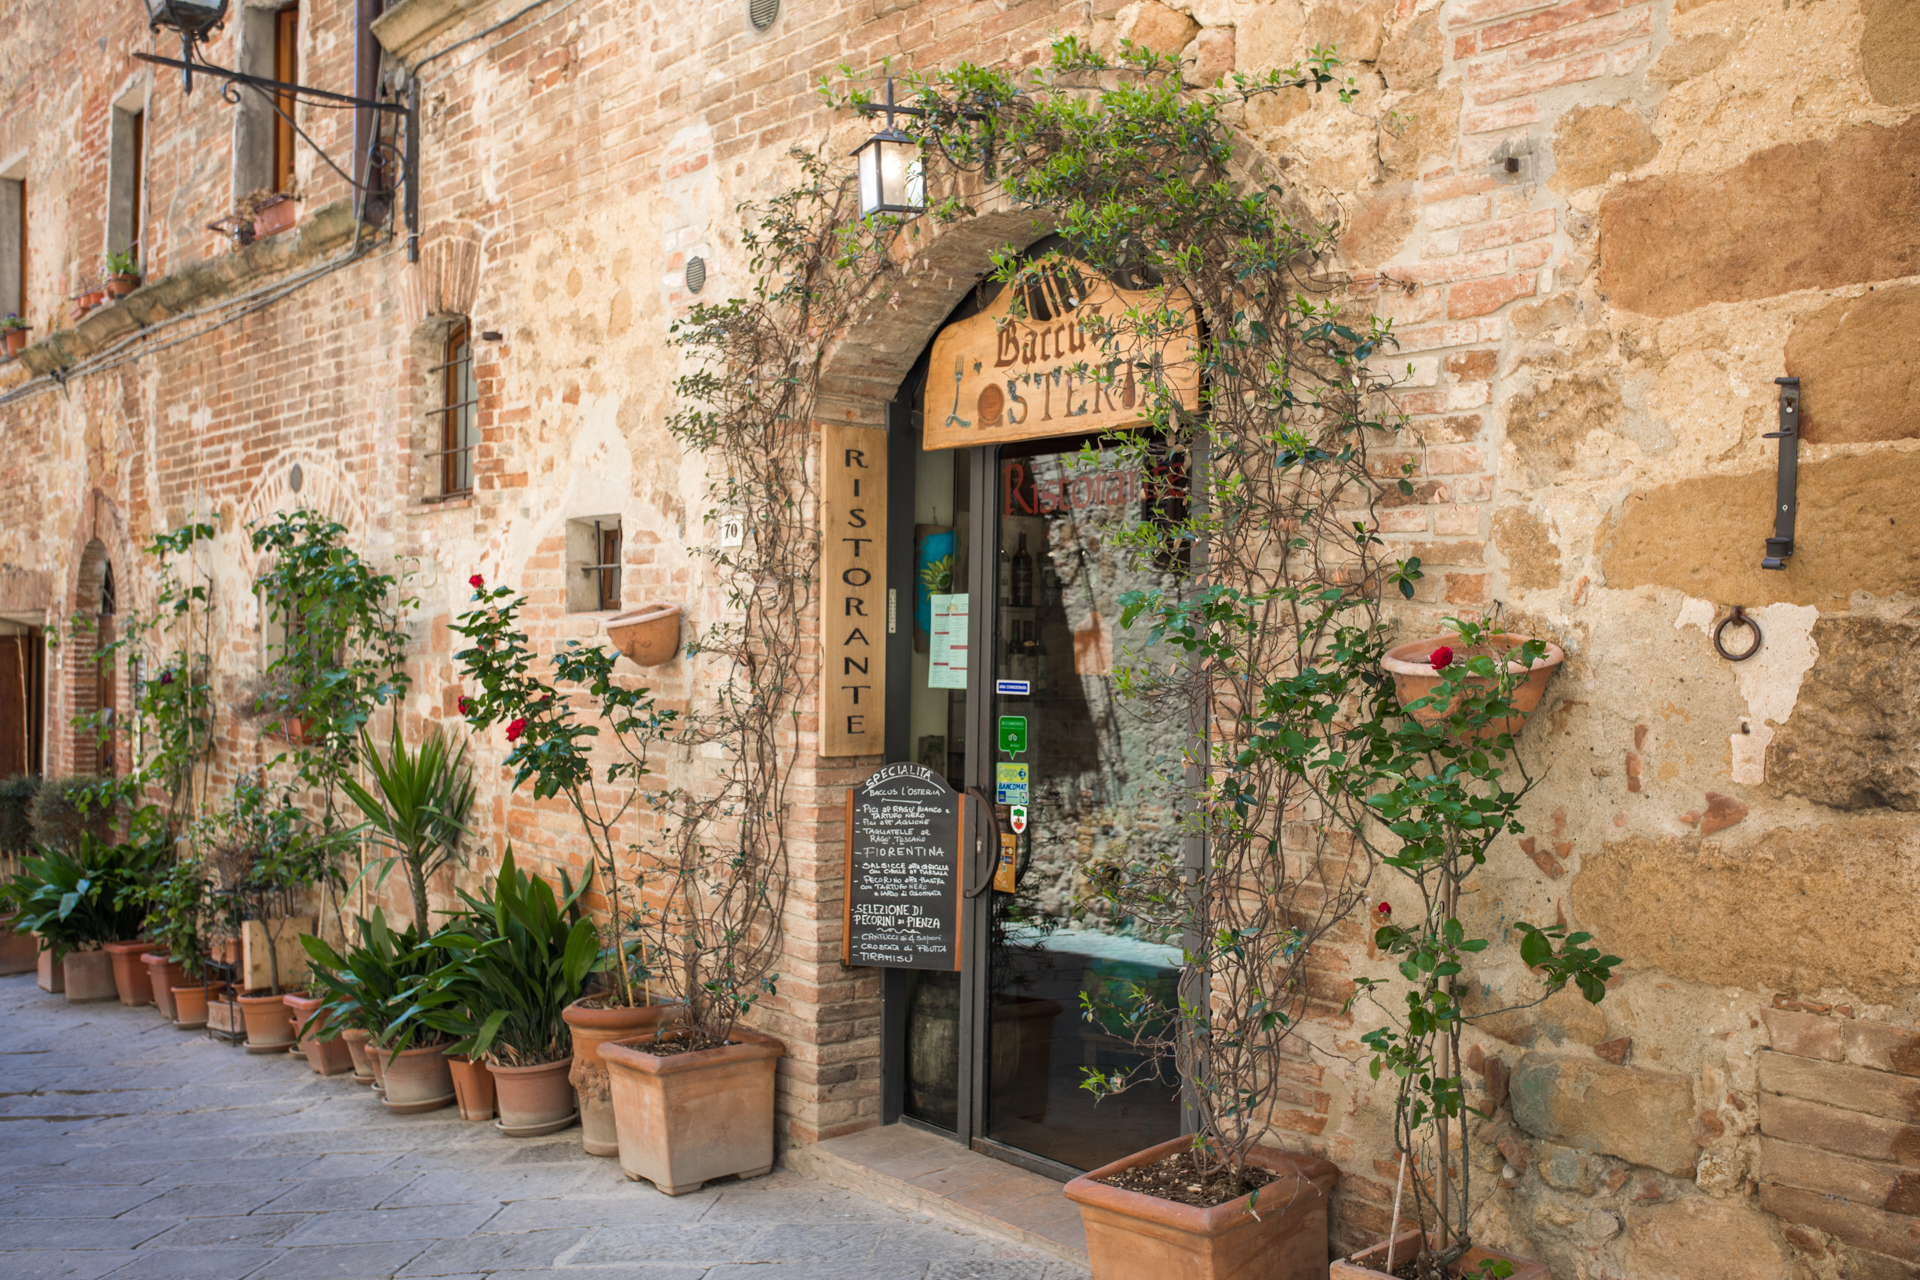 Garden Inspiration: Garden Ideas From Tuscany | Tuscany Garden Ideas by popular New England travel blogger, Shannon Shipman: image of a terracotta pots lined up along a stone building. 